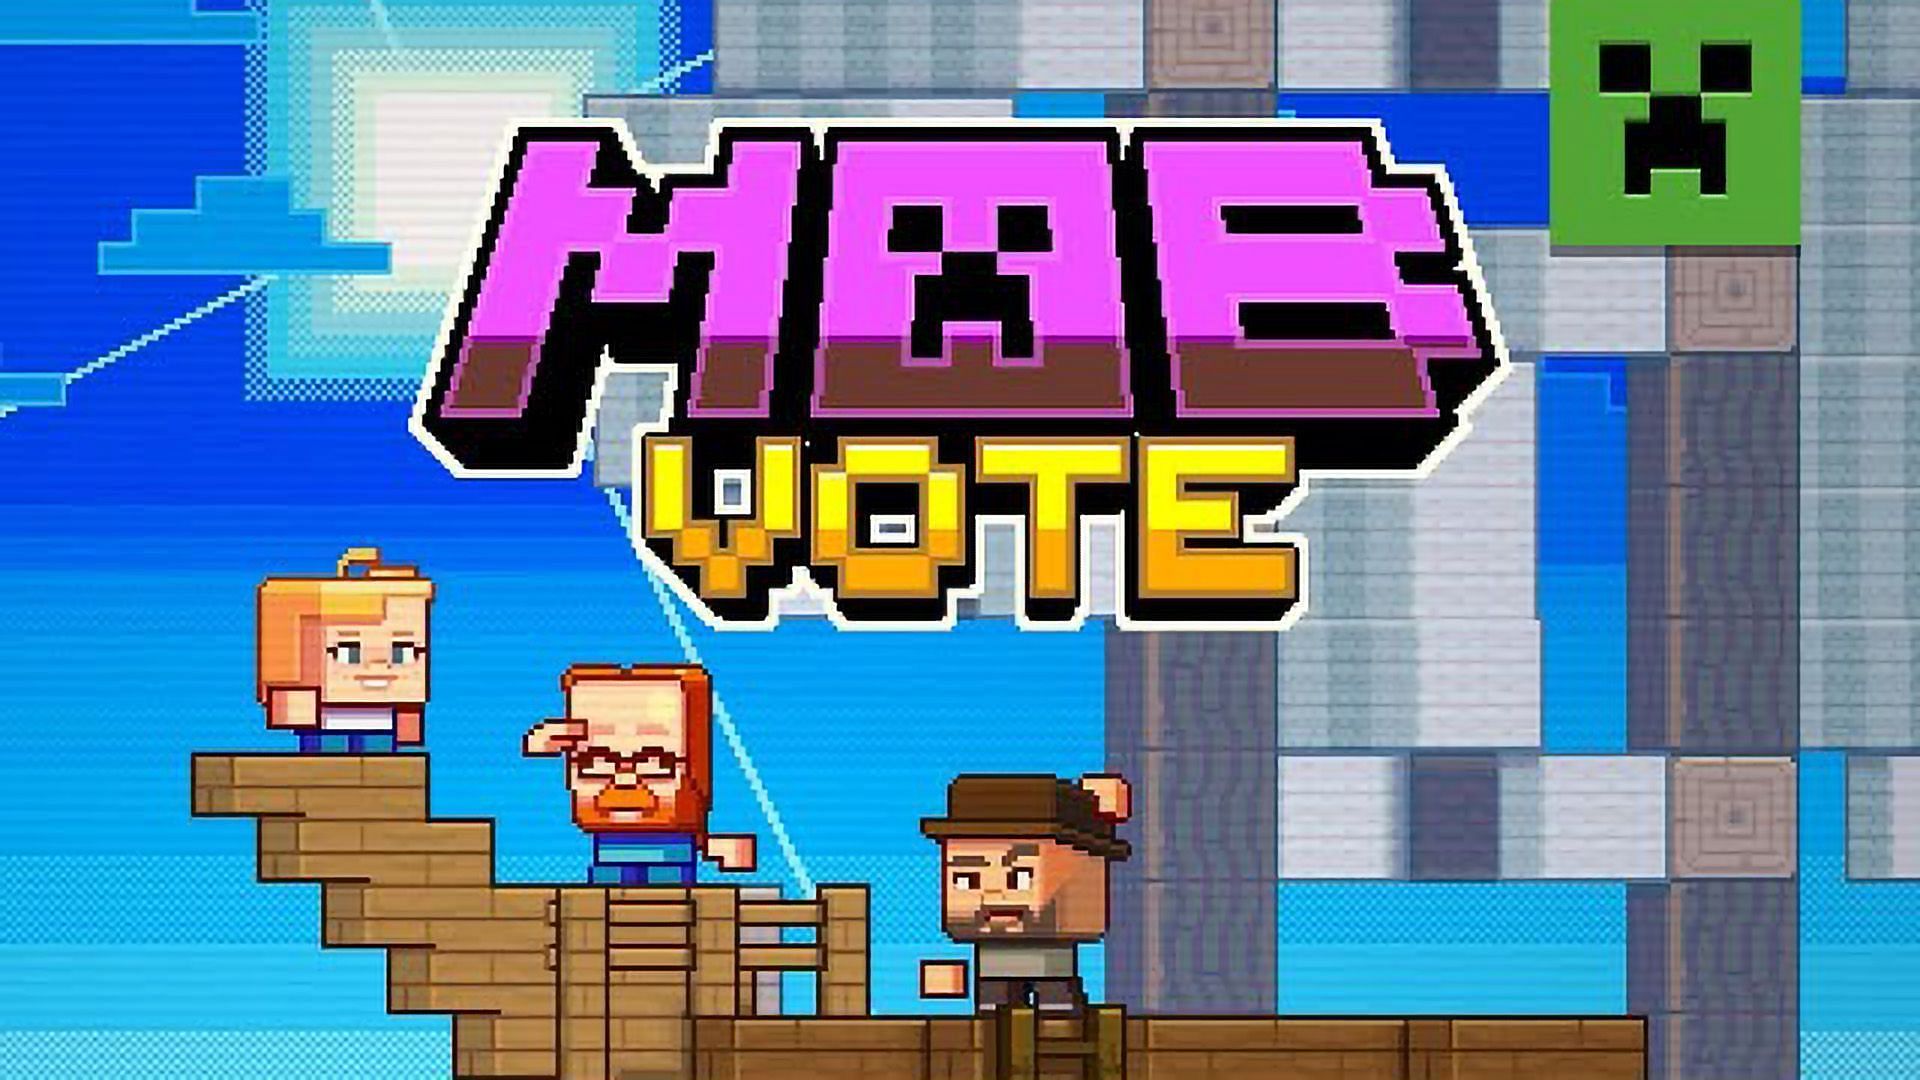 Some members of the community wish to end the Mob Vote practice (Image via YouTube/Minecraft)